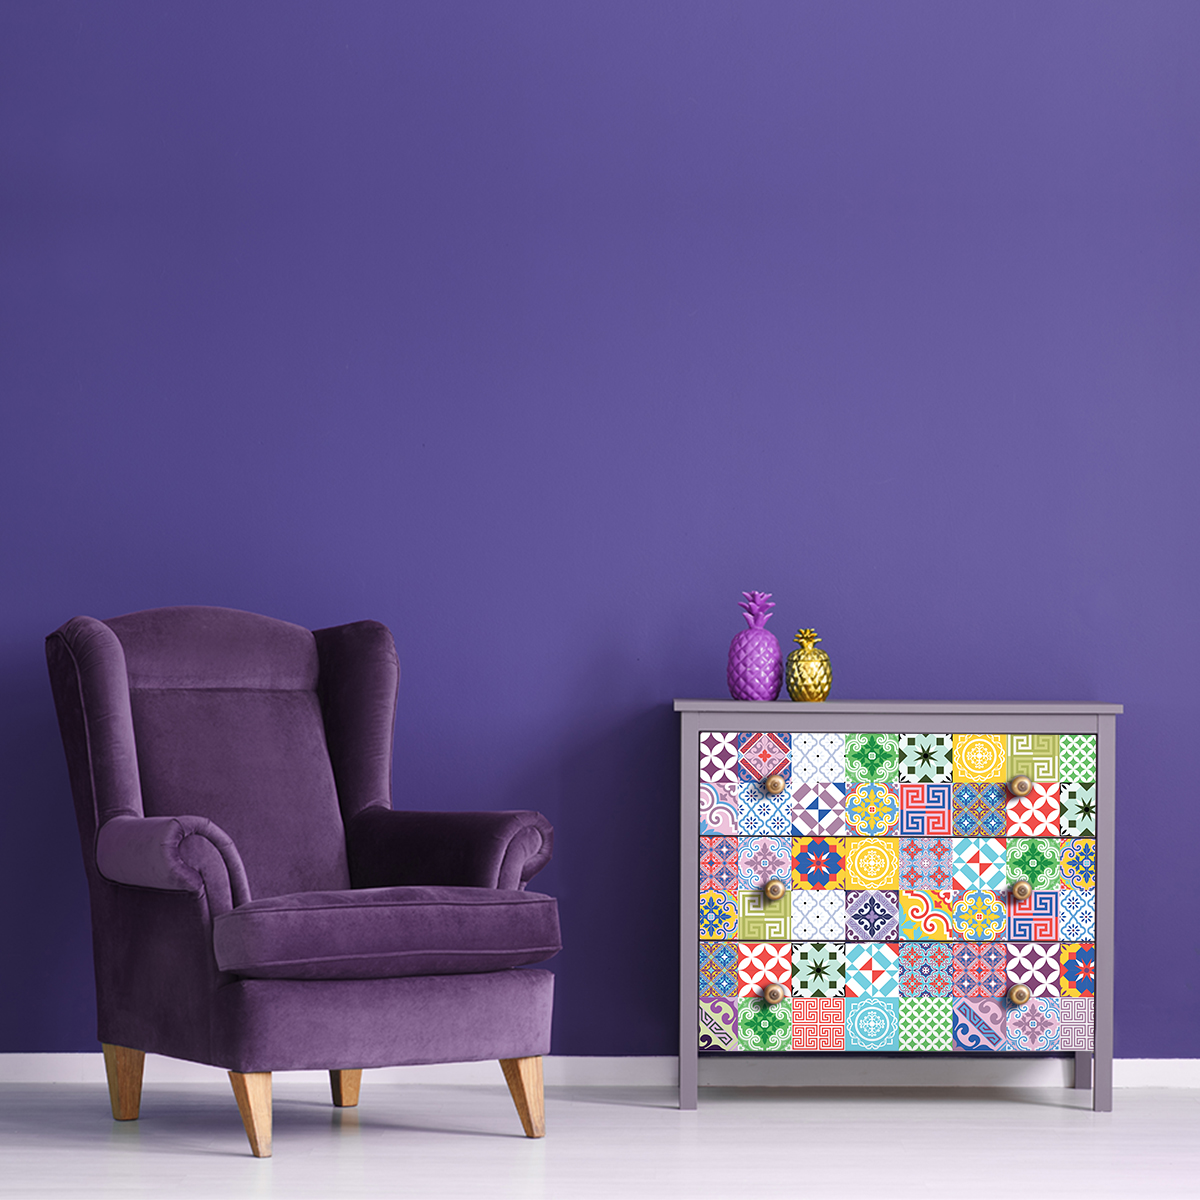 24 wall stickers furniture cement tile kariza